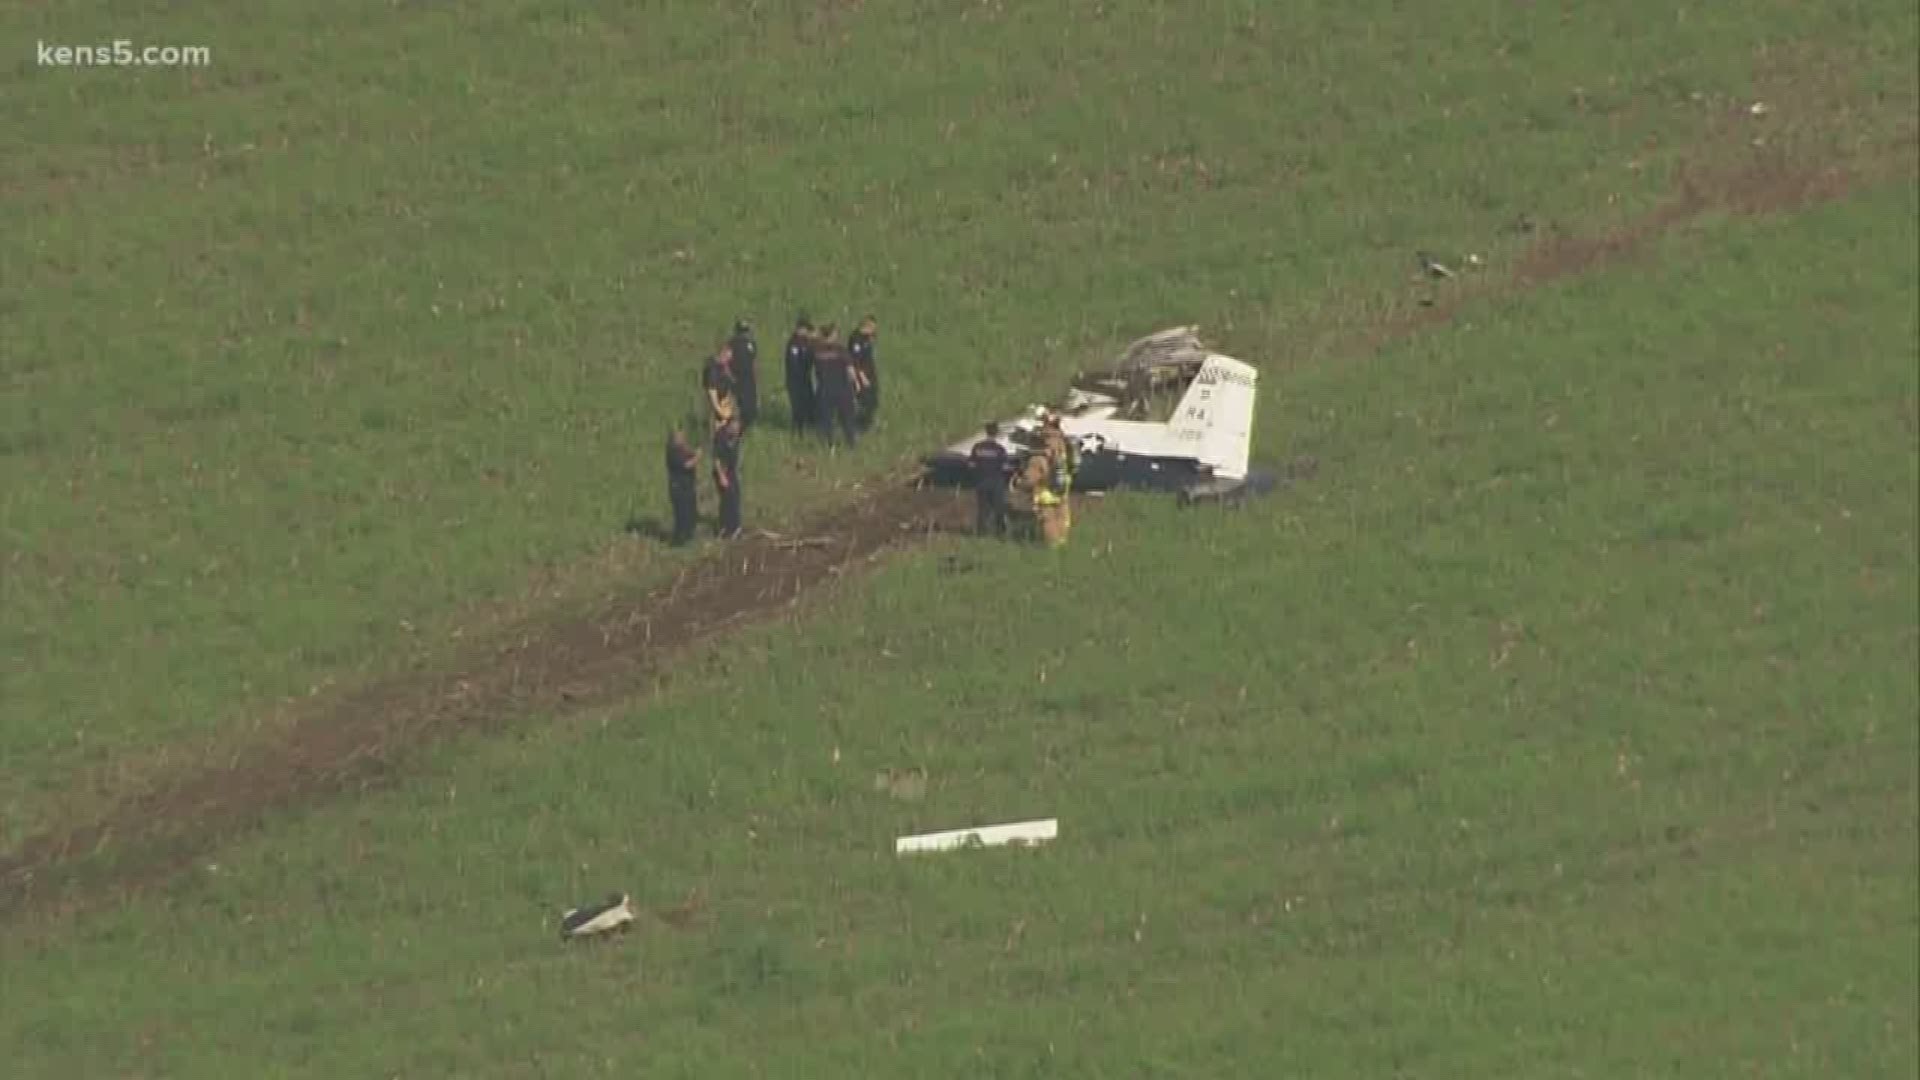 An Air Force plane crashed in northeast Bexar County on Tuesday. Thankfully, the pilots survived after ejecting from the aircraft before the plane hit the ground.